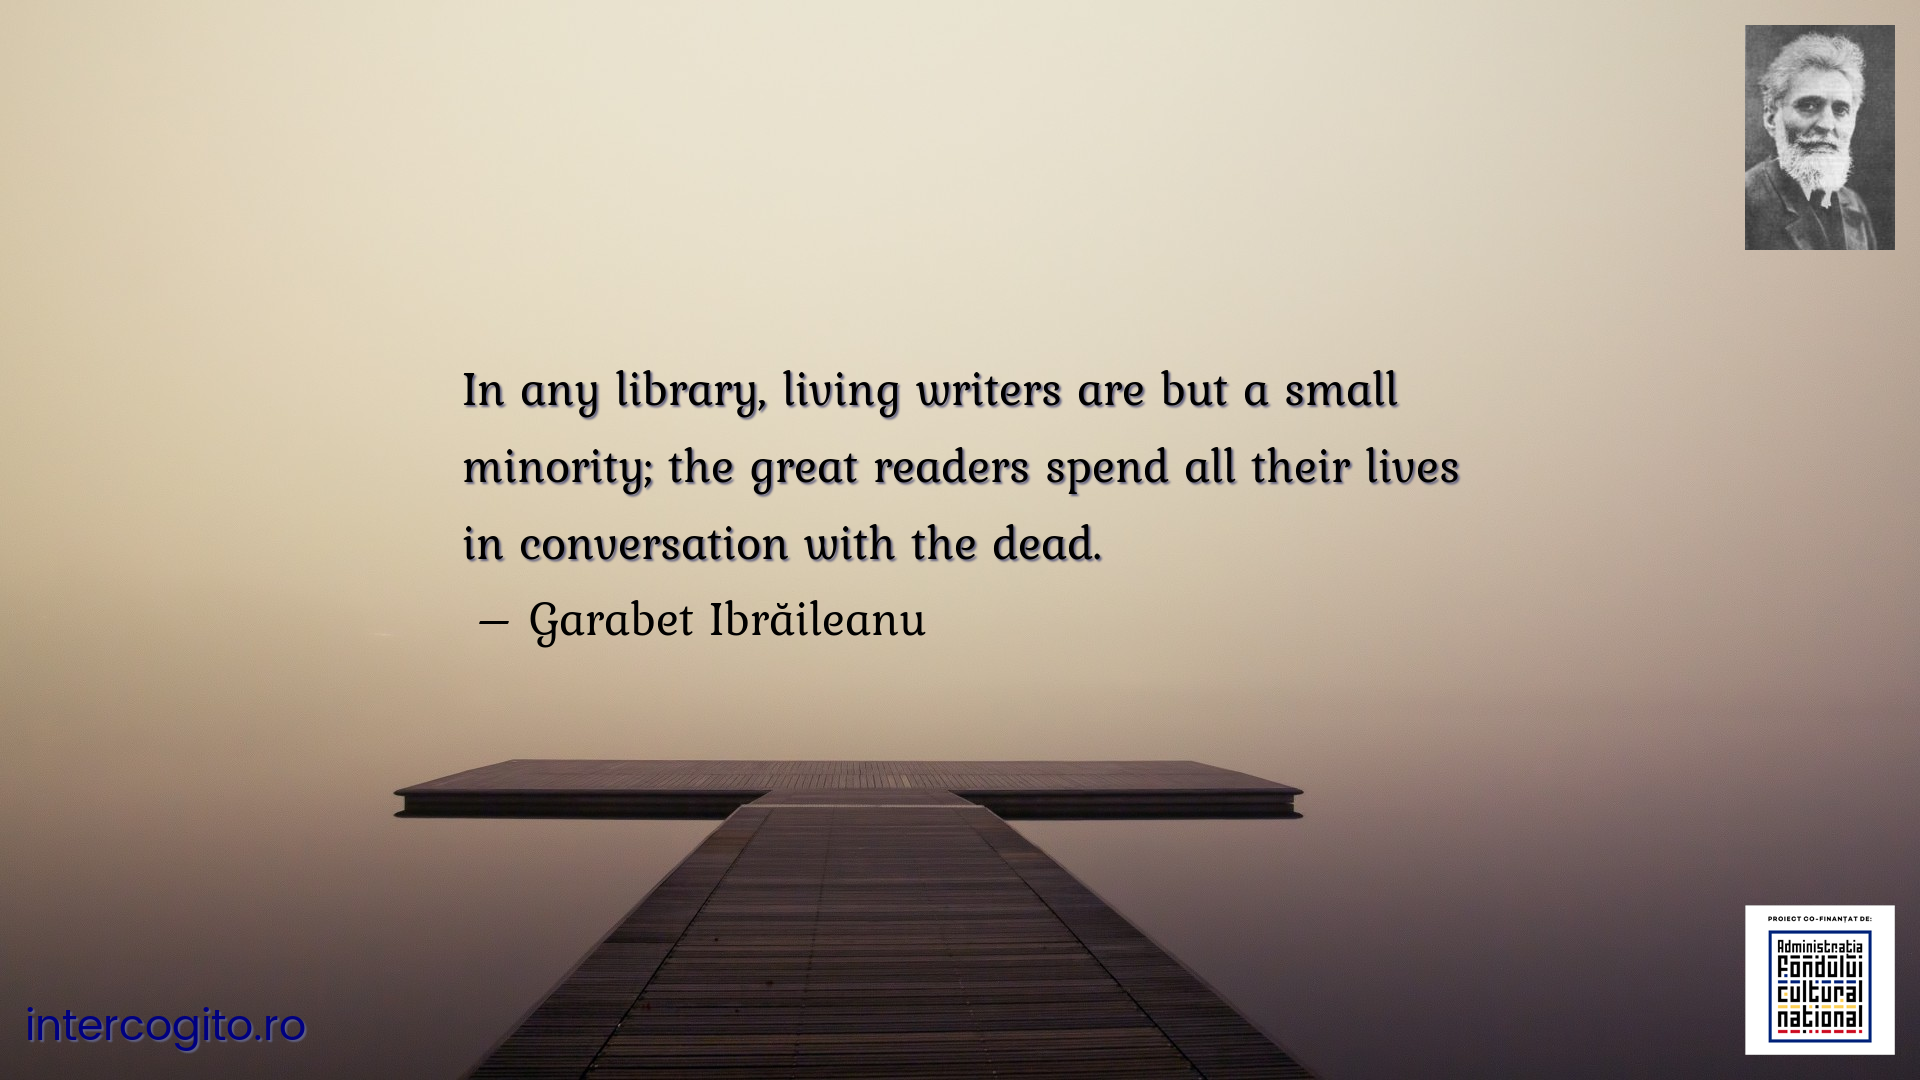 In any library, living writers are but a small minority; the great readers spend all their lives in conversation with the dead.